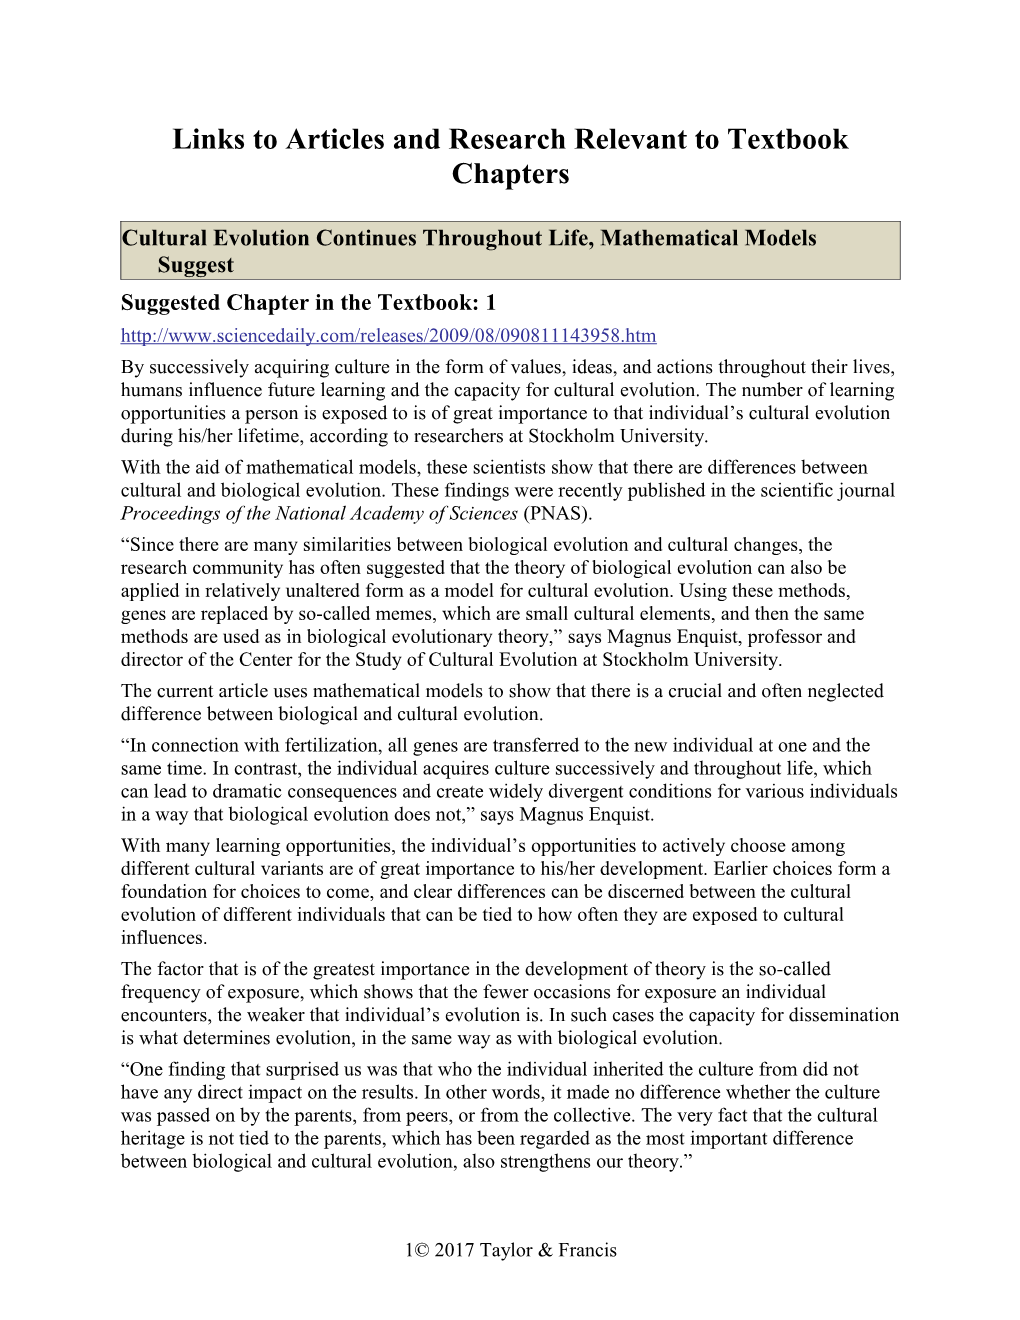 Links to Articles and Research Relevant to Textbook Chapters